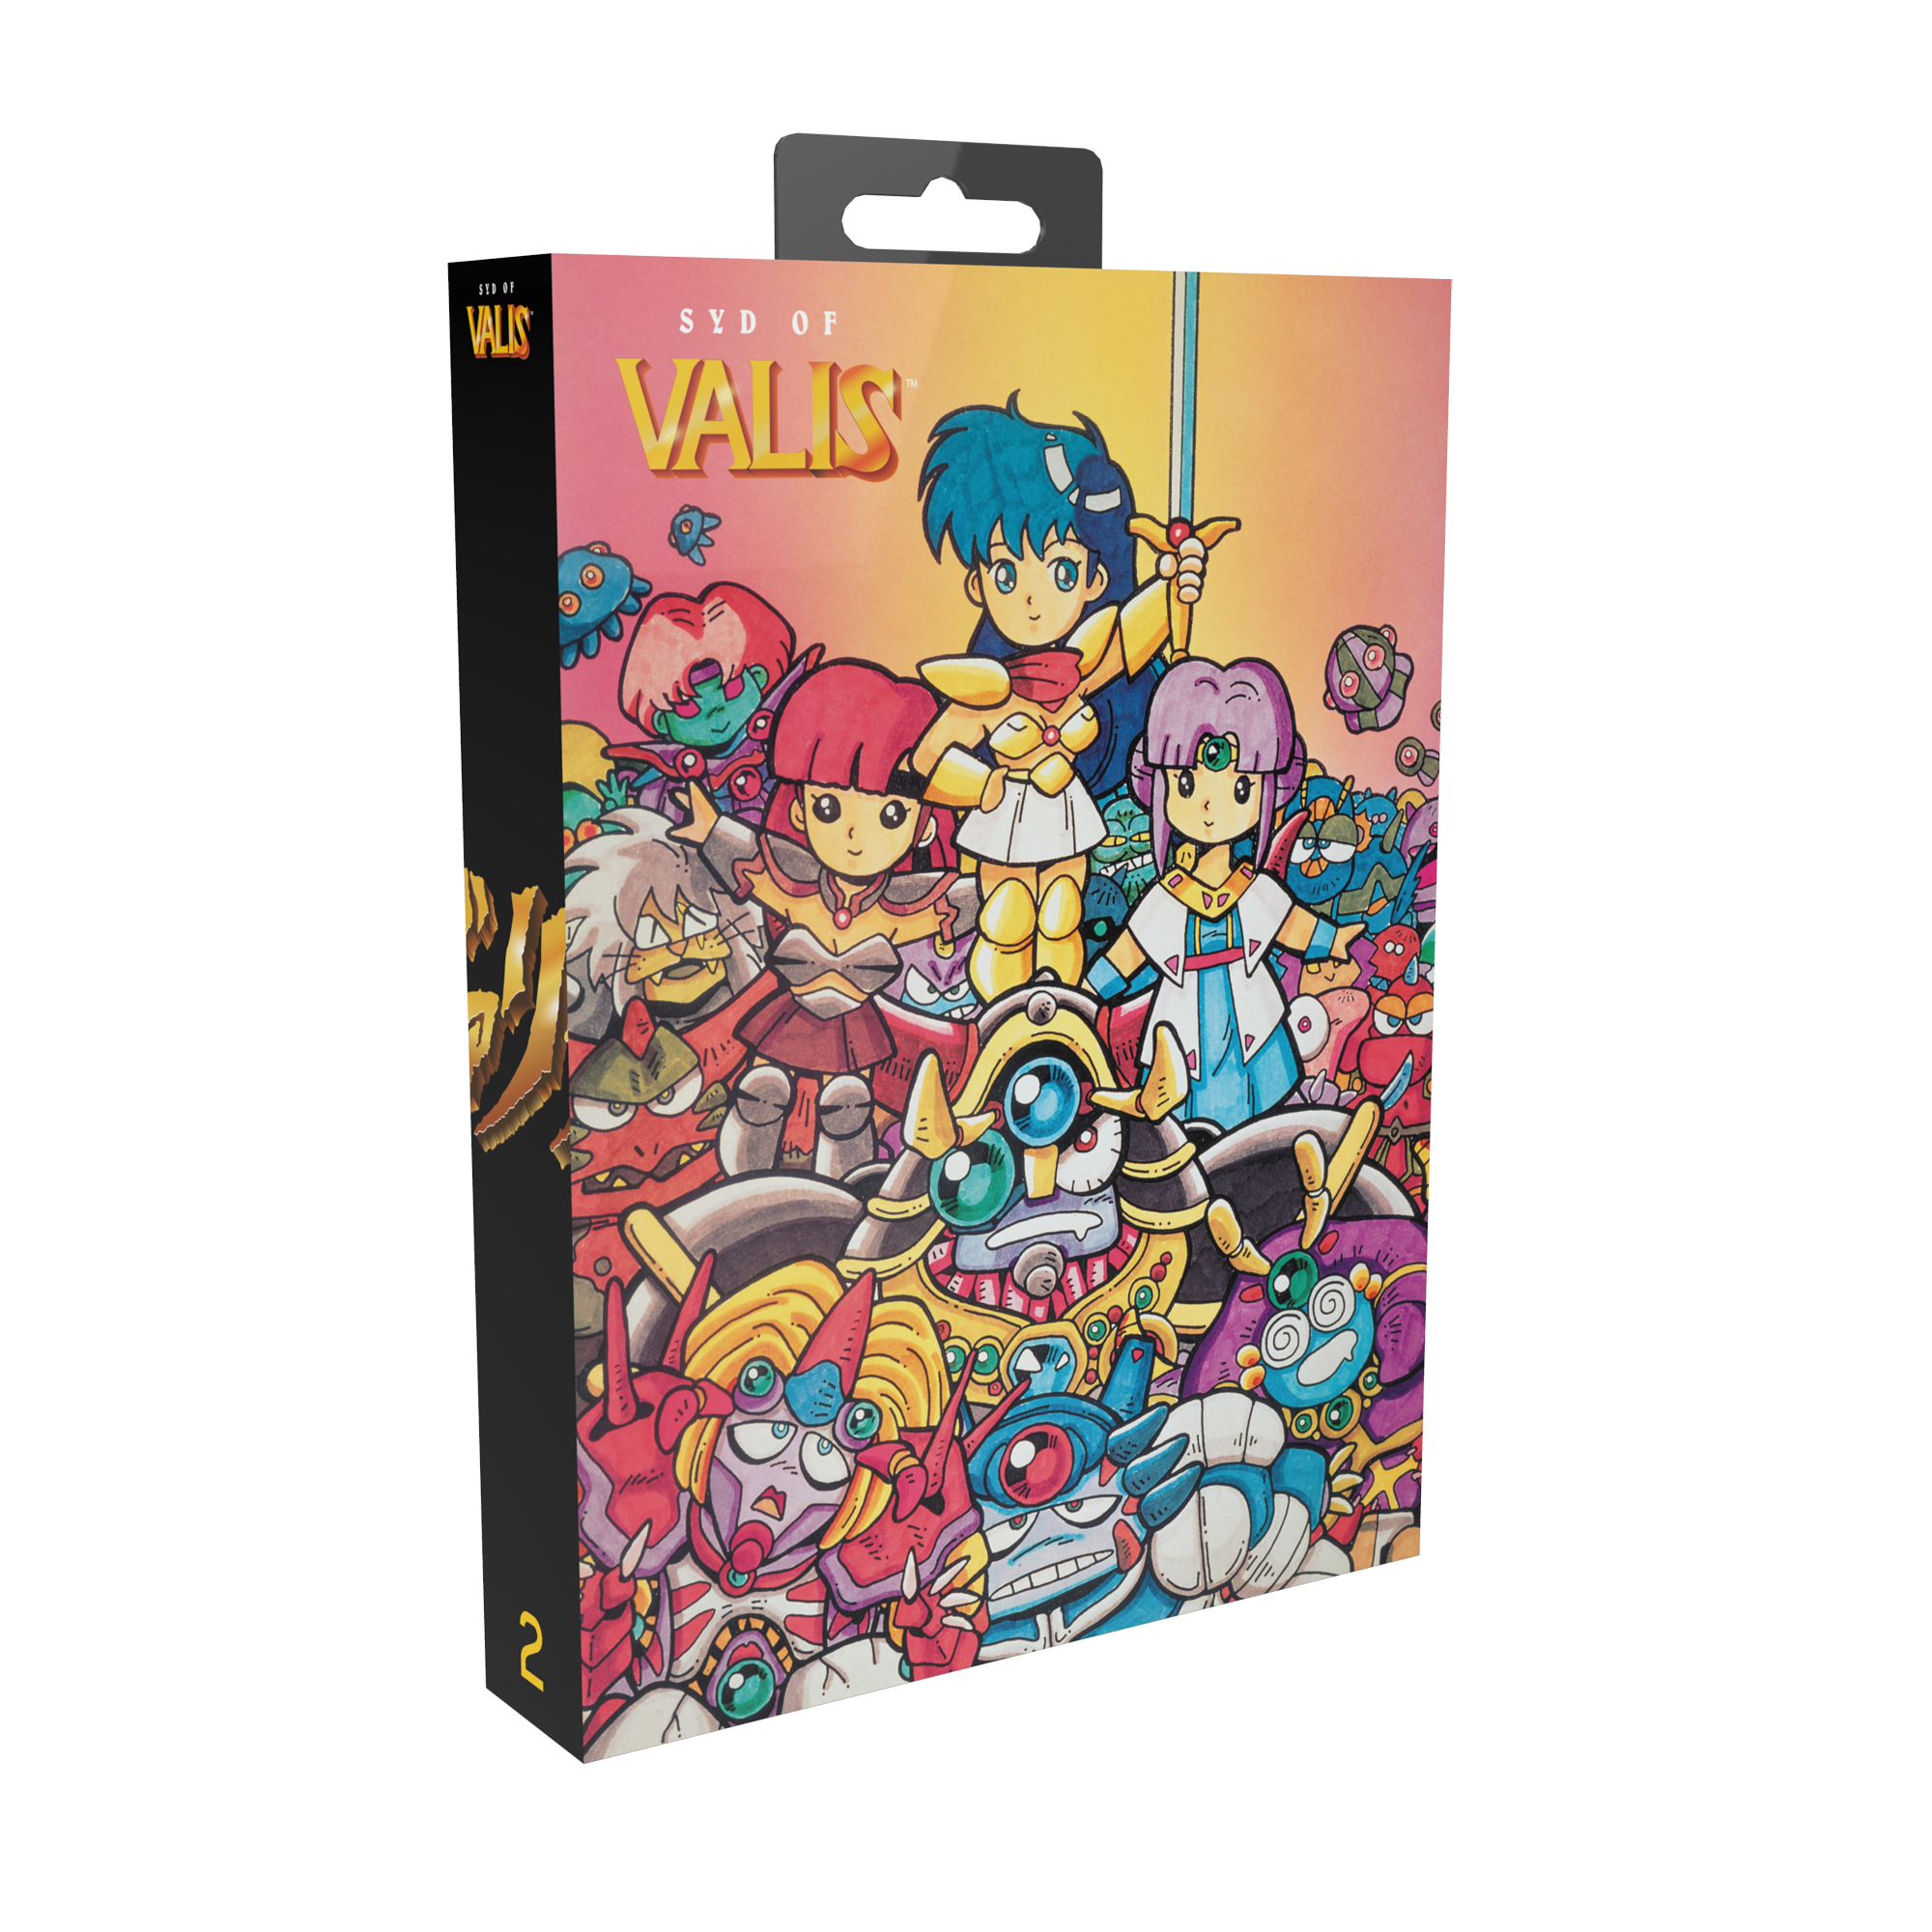 ValisCollectionPressKit Syd of Valis Slipcover 01.png